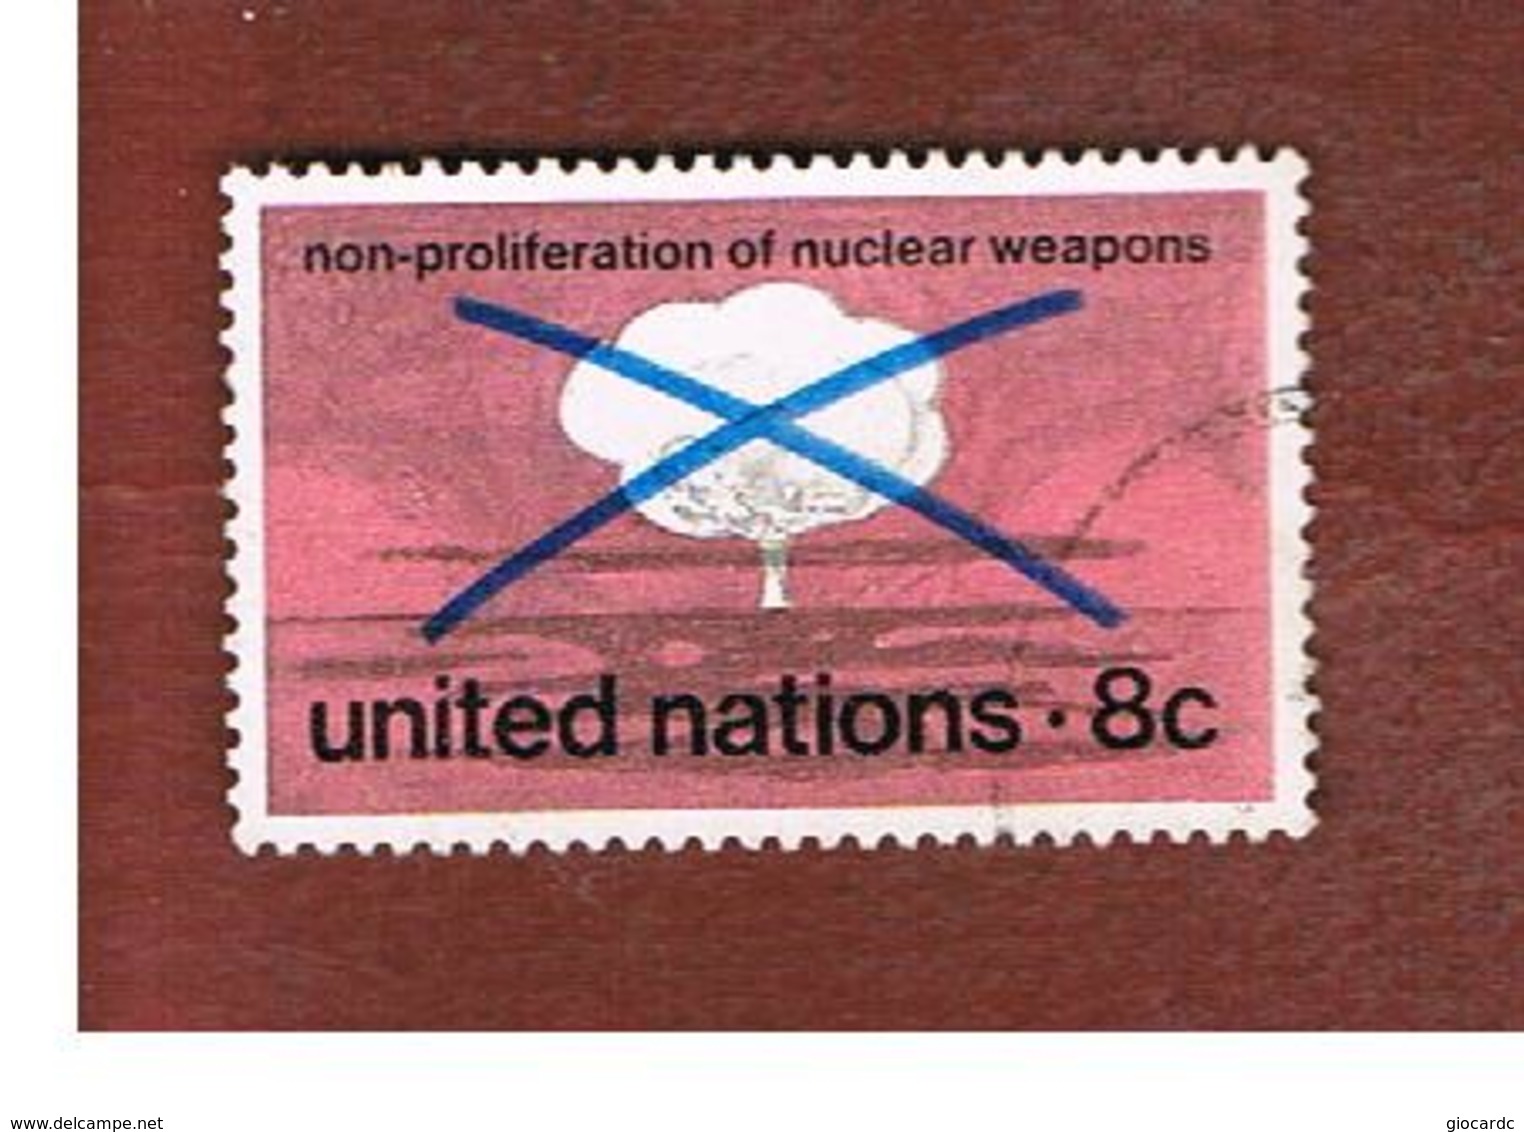 ONU (UNITED NATIONS) NEW YORK   - SG NY227   -  1972 NON-PROLIFERATION OF NUCLEAR   WEAPONS    - USED - Gebraucht